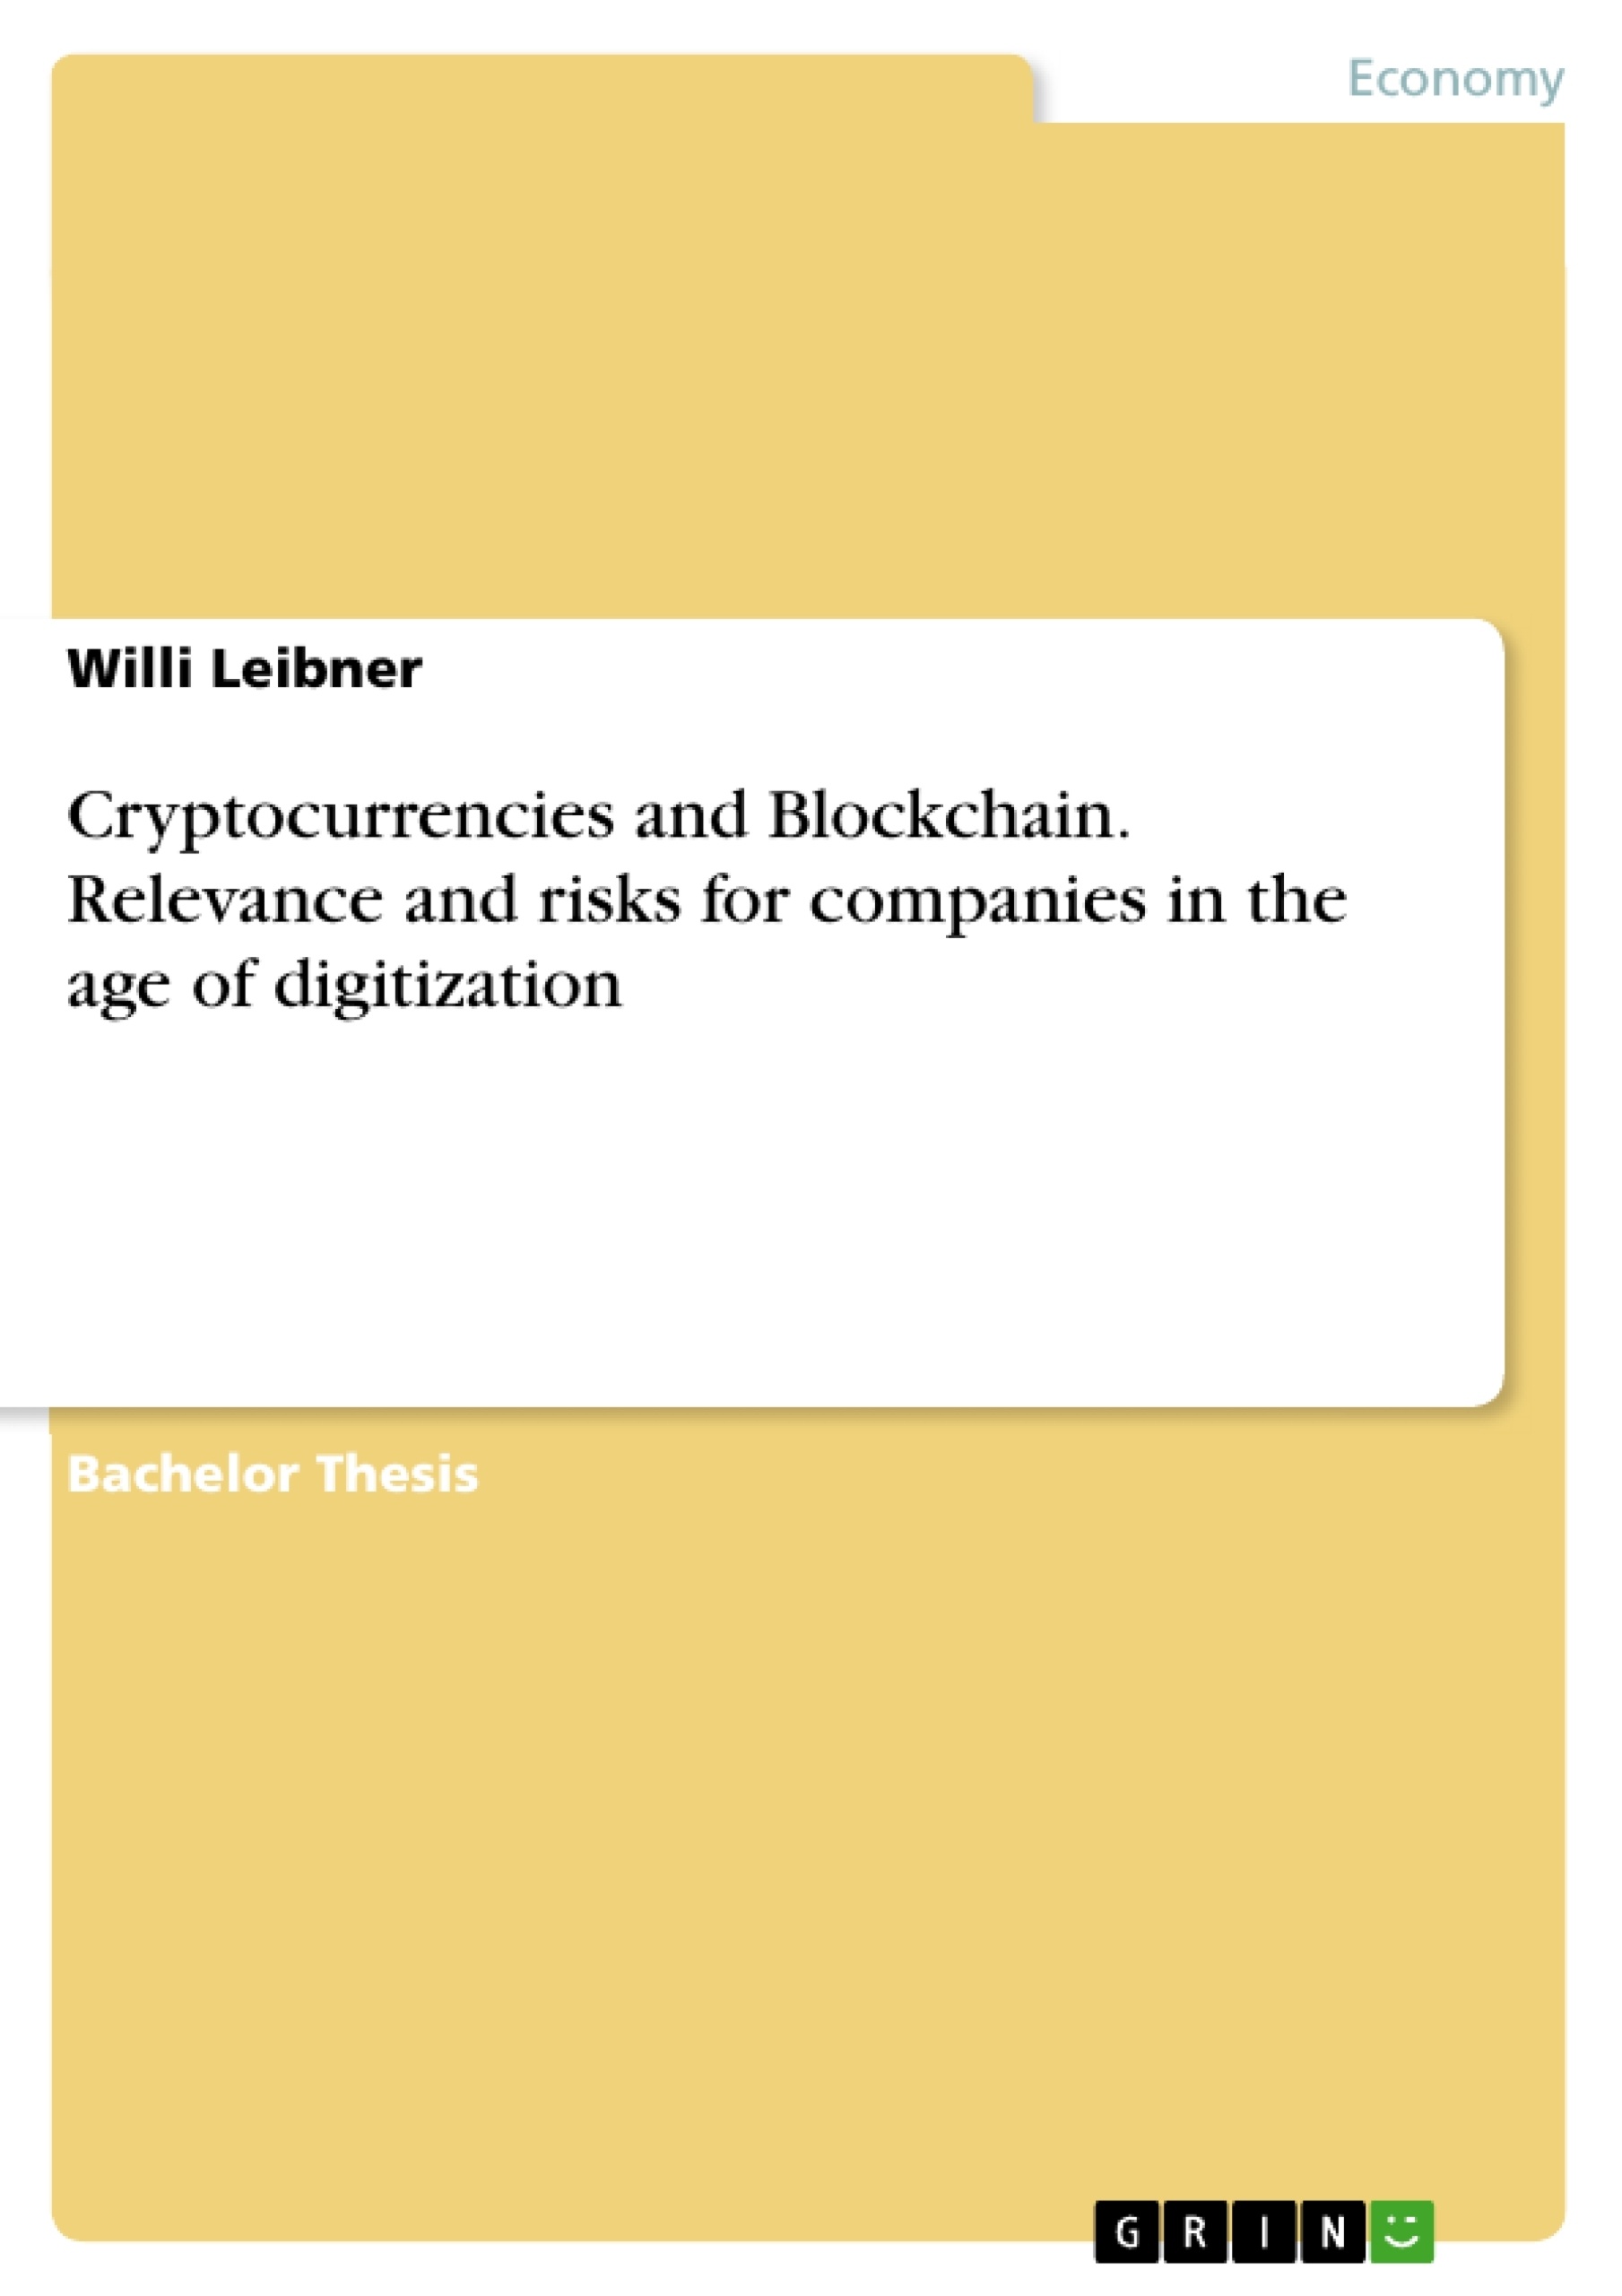 Title: Cryptocurrencies and Blockchain. Relevance and risks for companies in the age of digitization